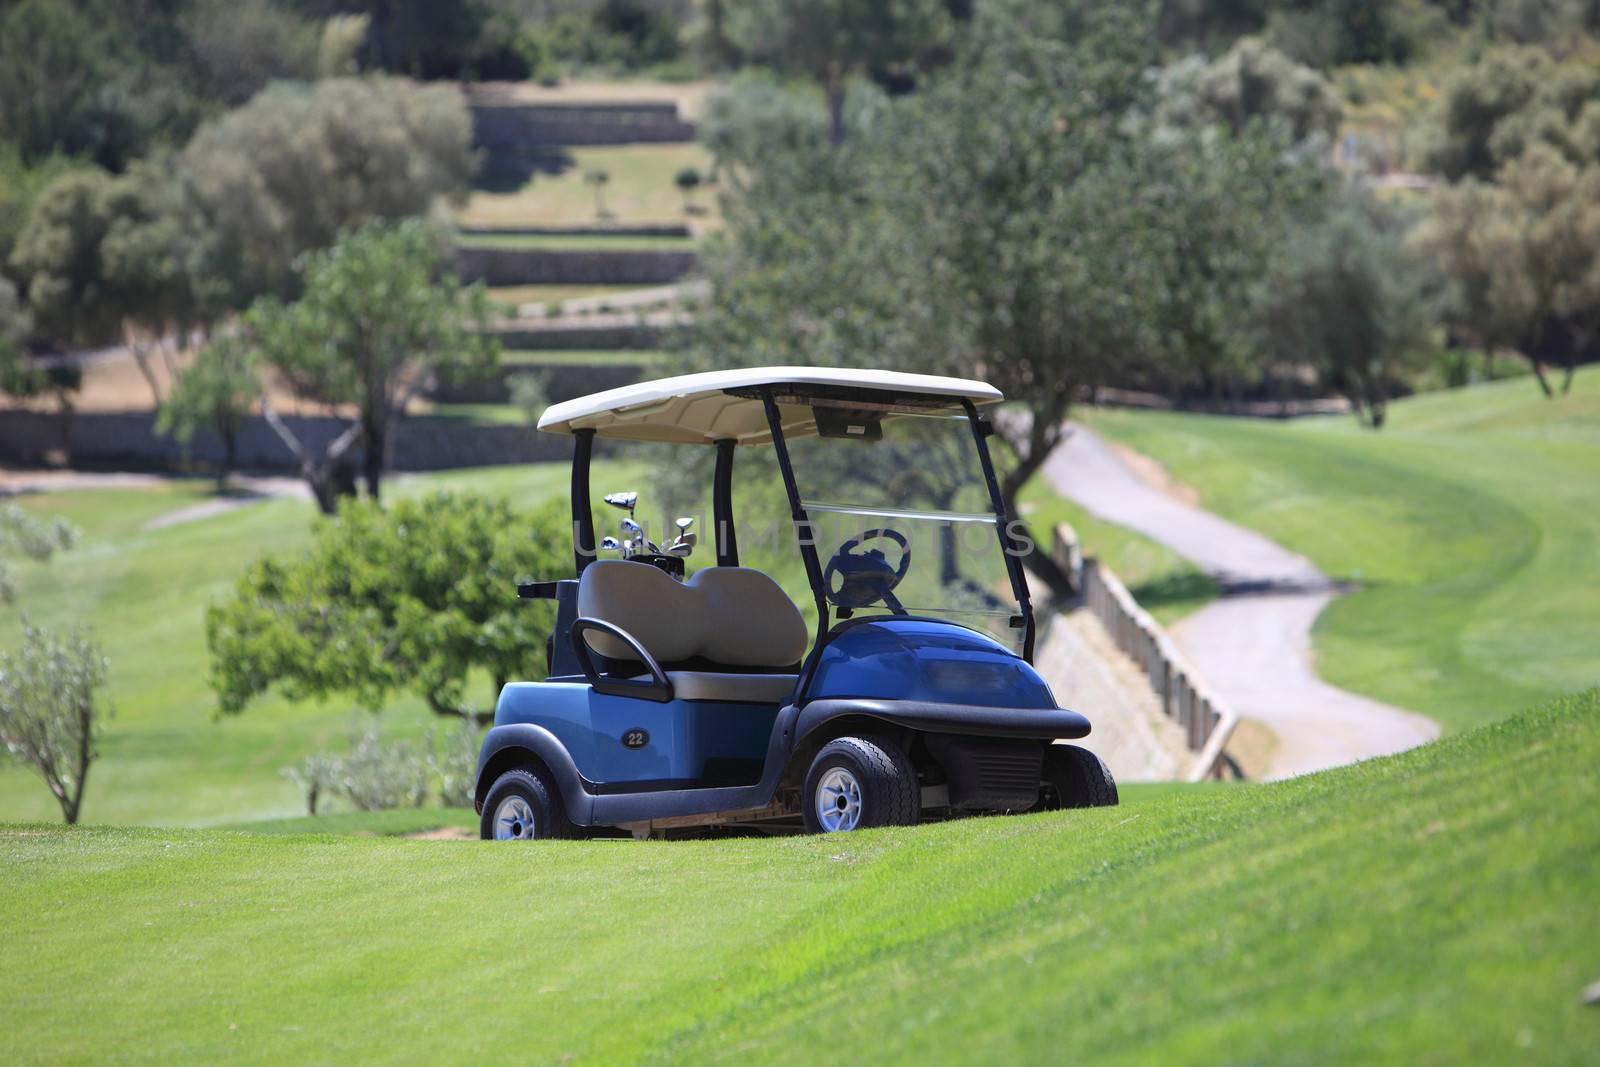 Golf cart parked on a golf course by Farina6000